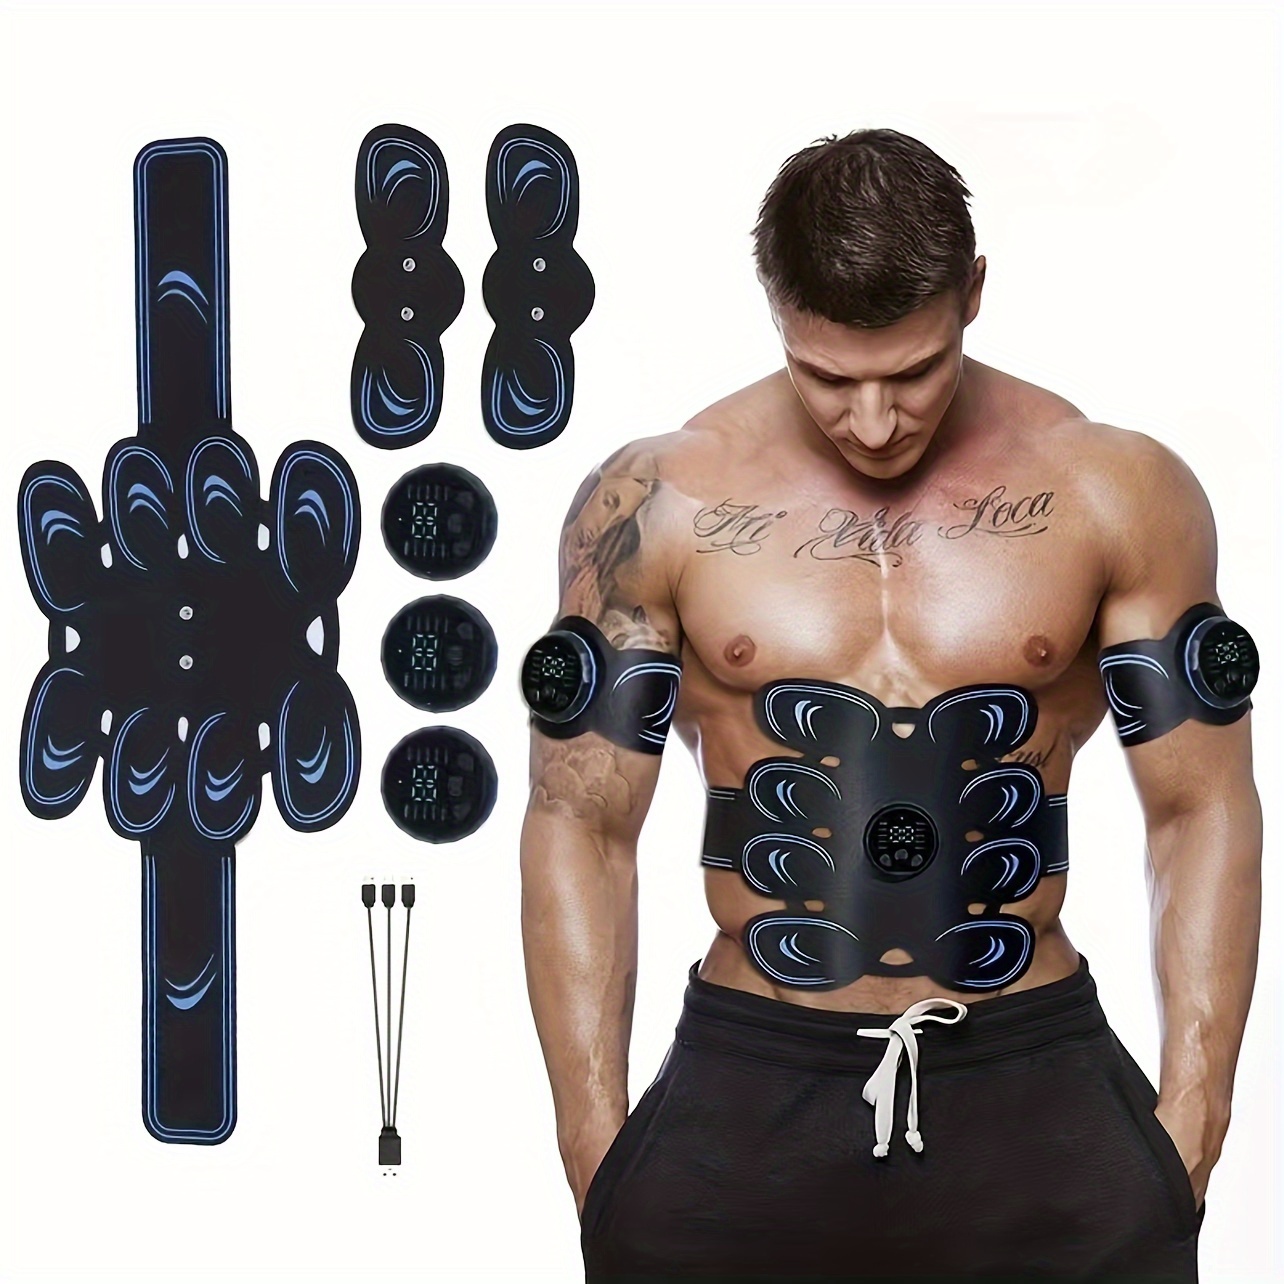 ABS Stimulator, Ab Machine, Abdominal Toning Belt Muscle Toner Fitness  Training Gear Ab Trainer Equipment for Home